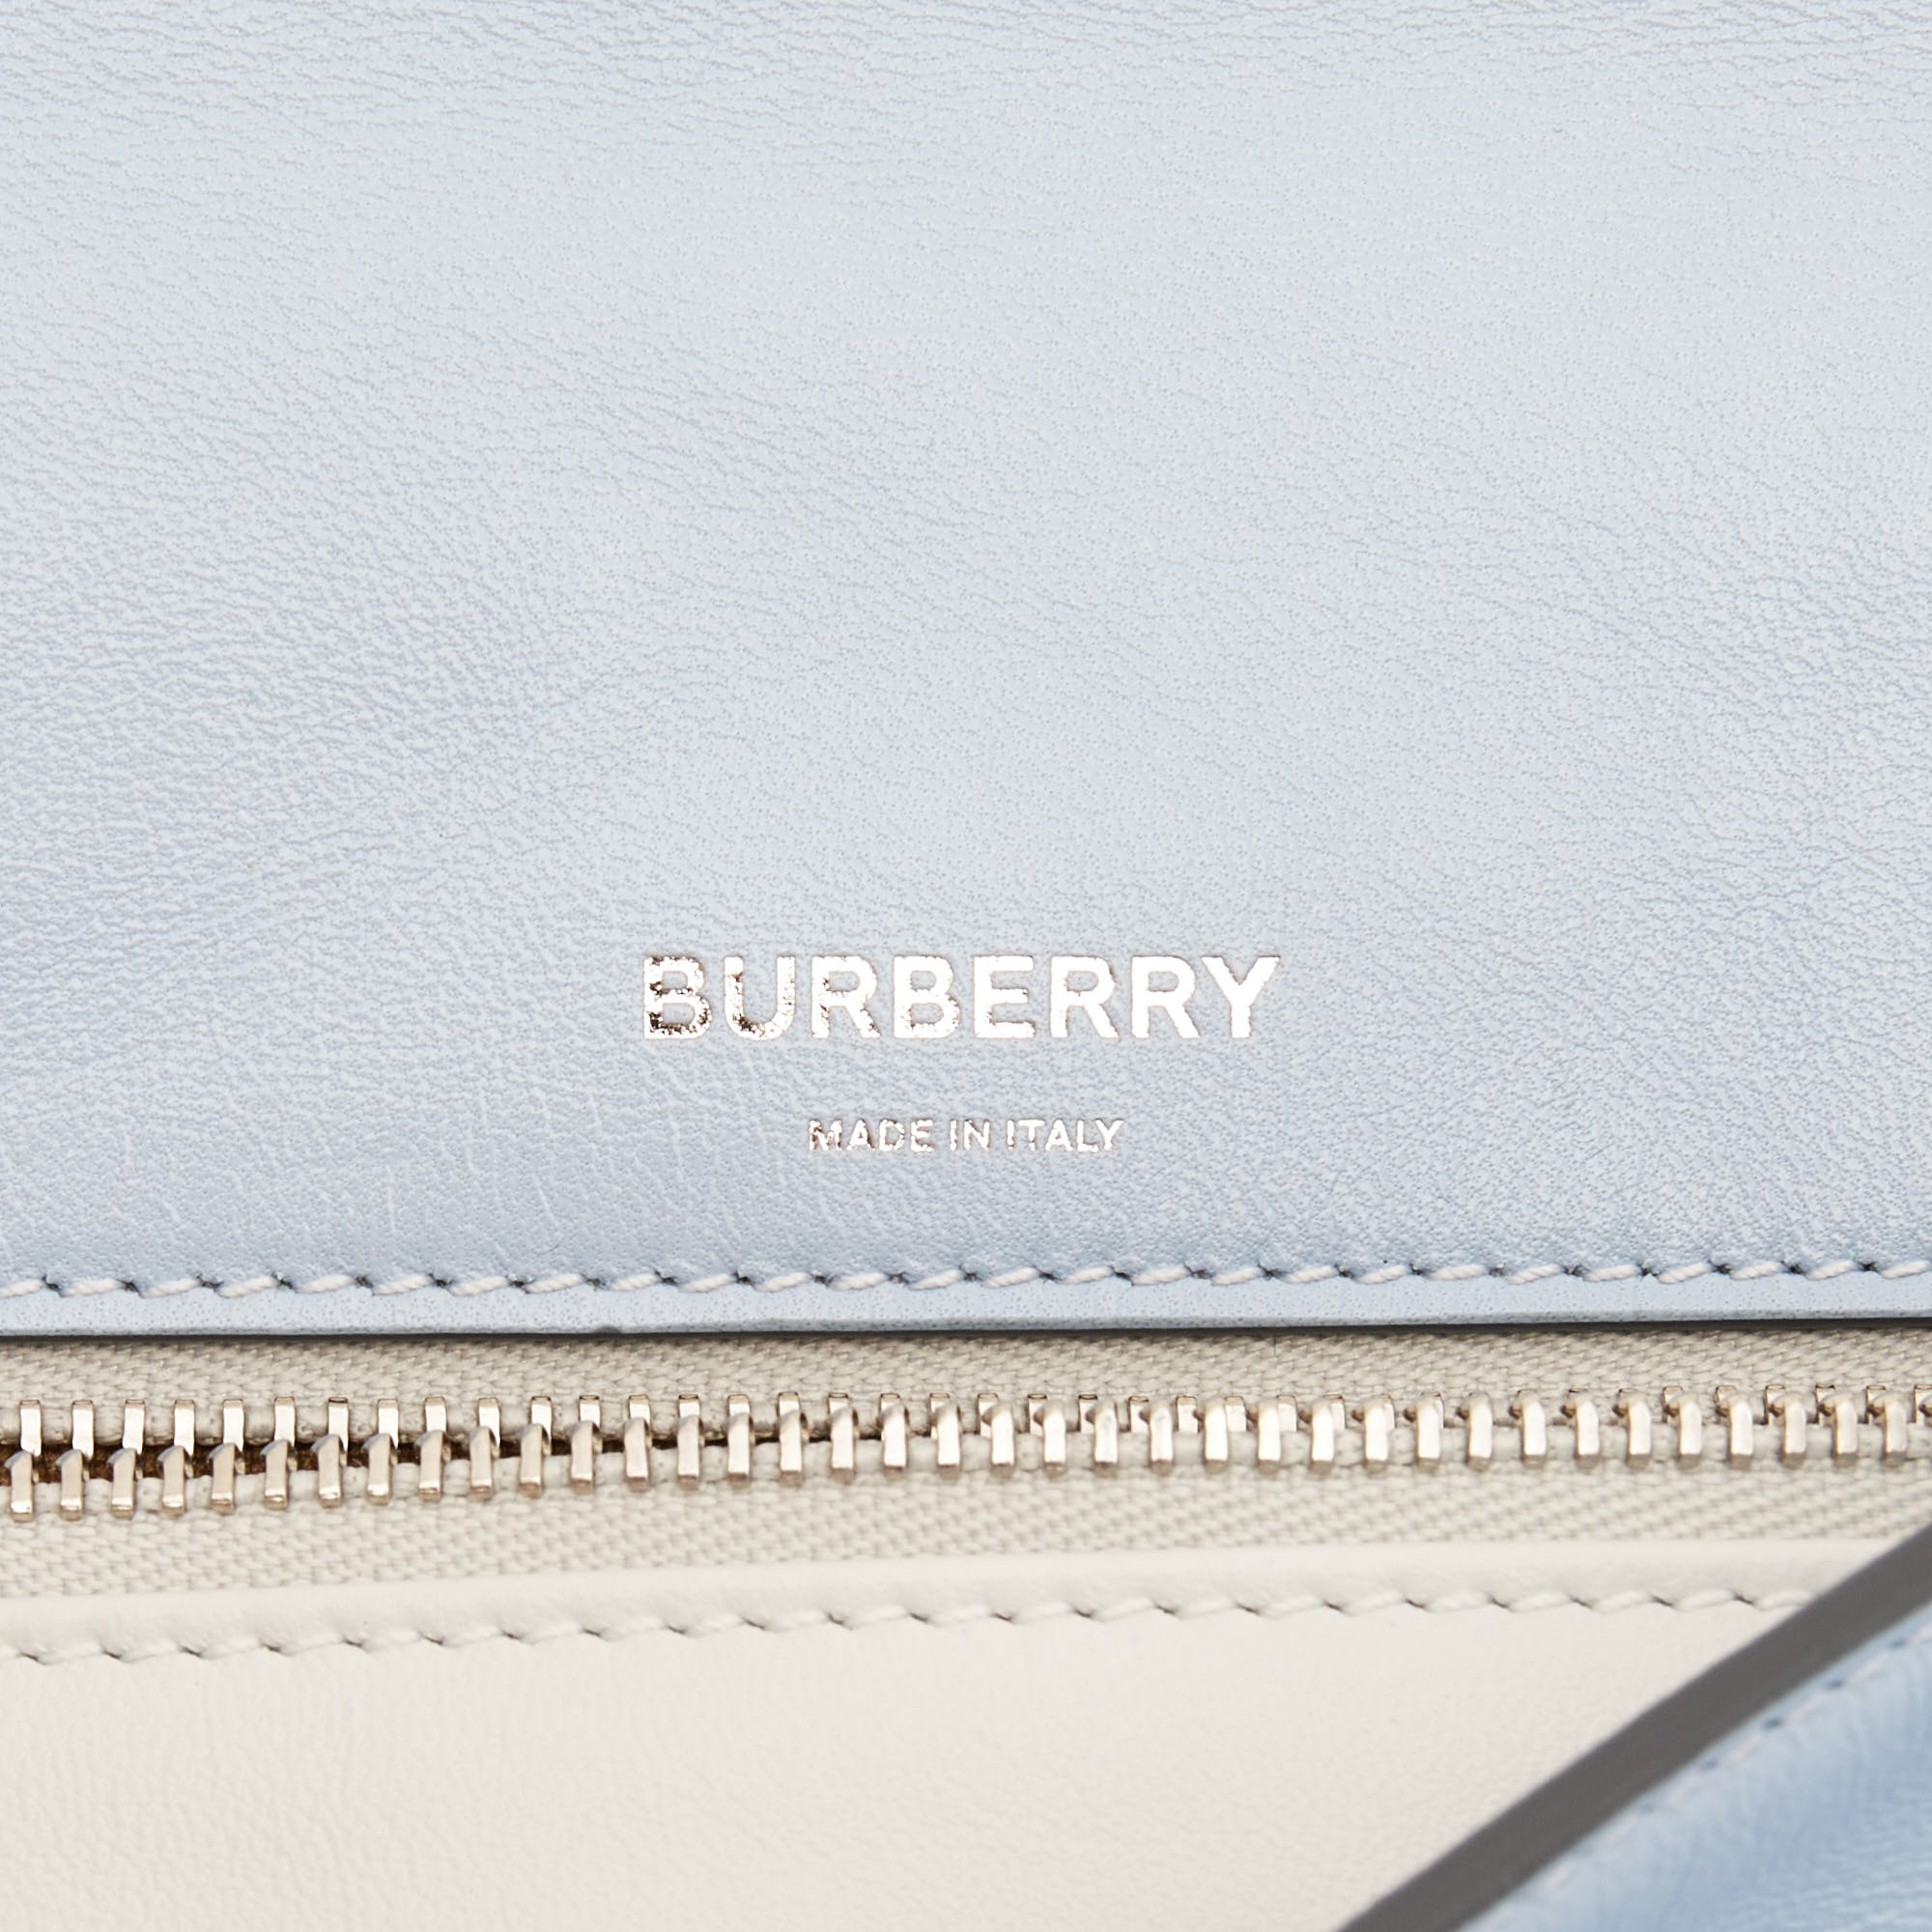 Burberry Light Blue Soft Leather Small Olympia Shoulder Bag